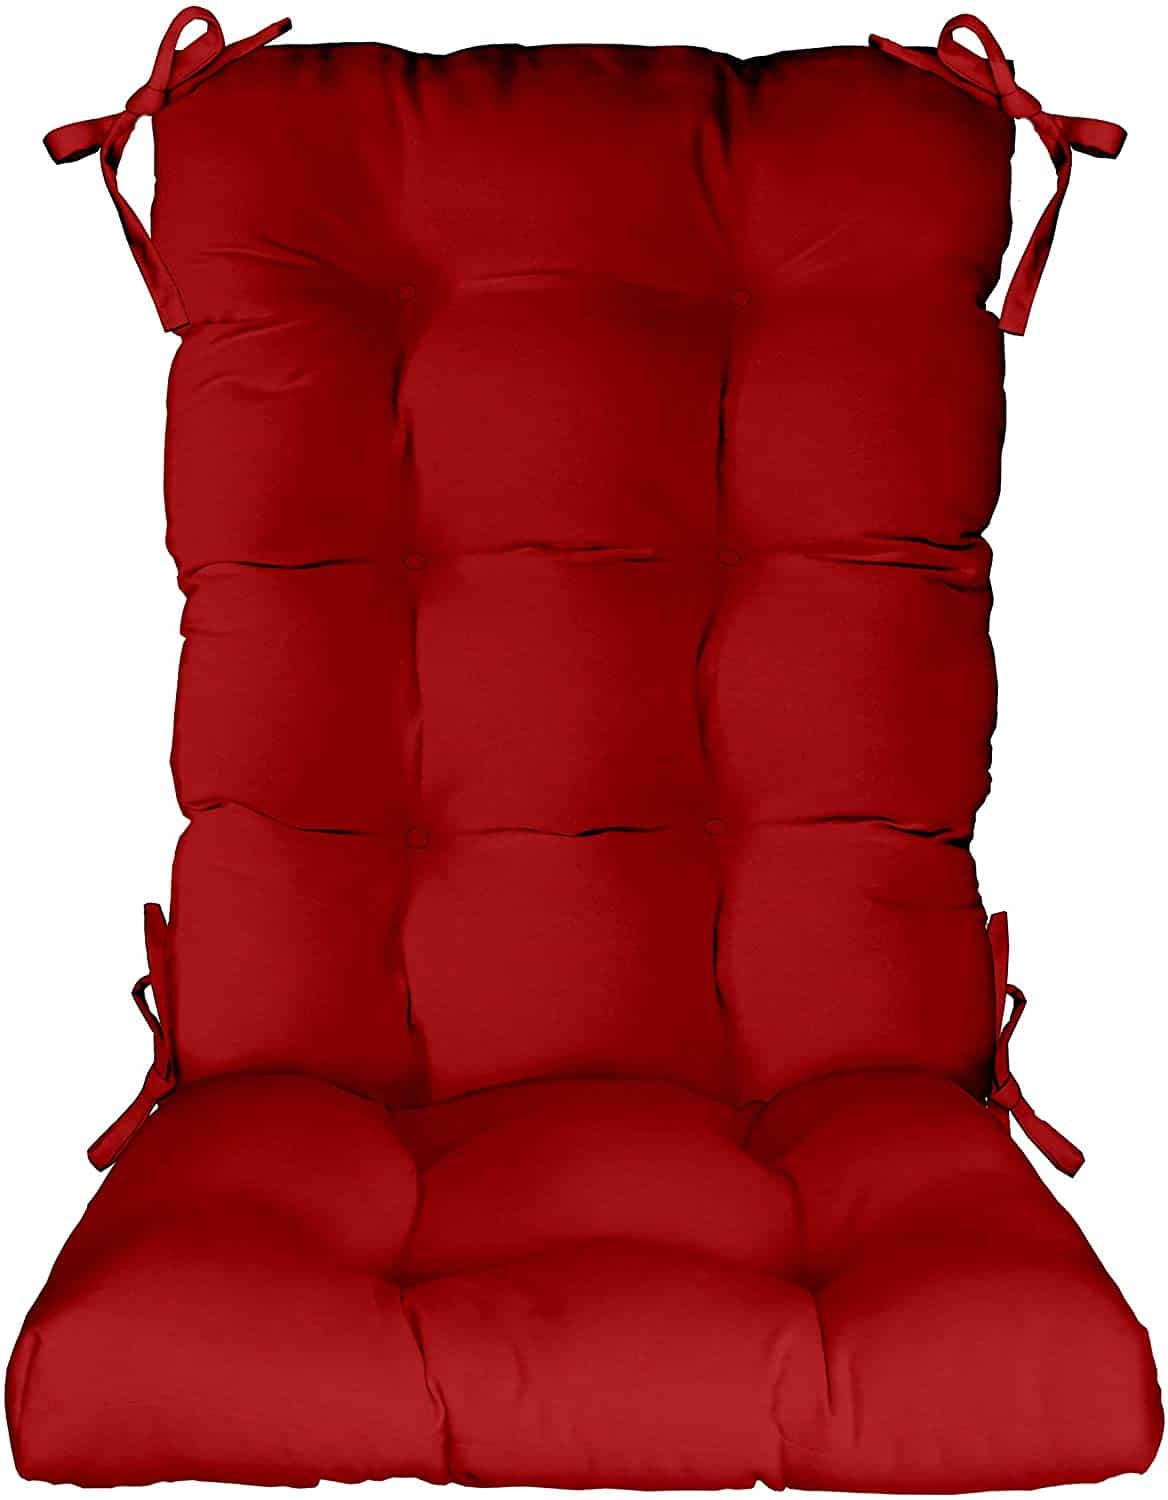 A red chair cushion for outdoor seating.